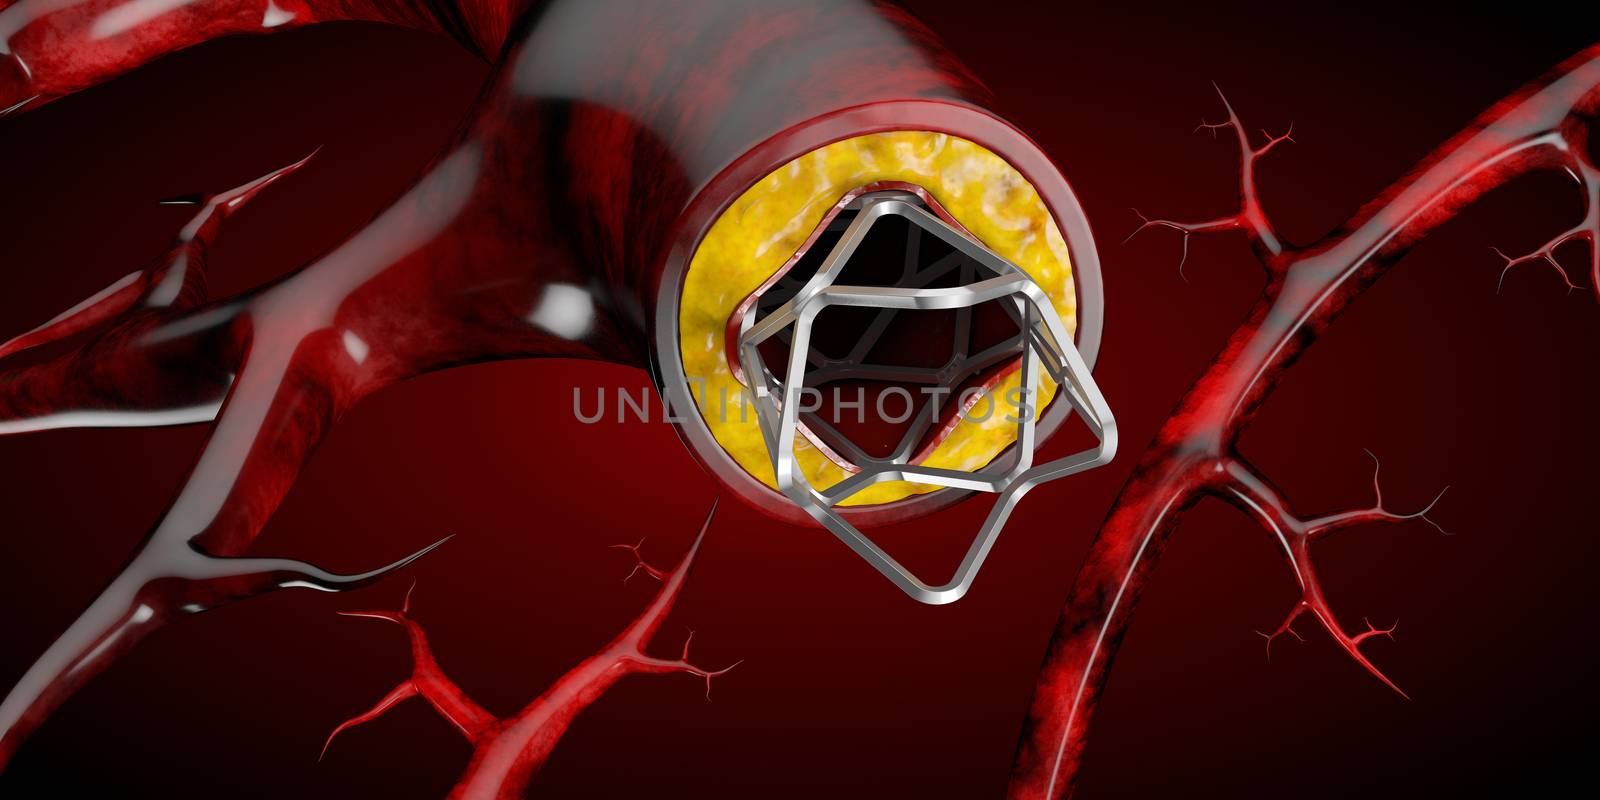 Stent medical implant concept as a heart disease treatment symbol 3D illustration by tussik